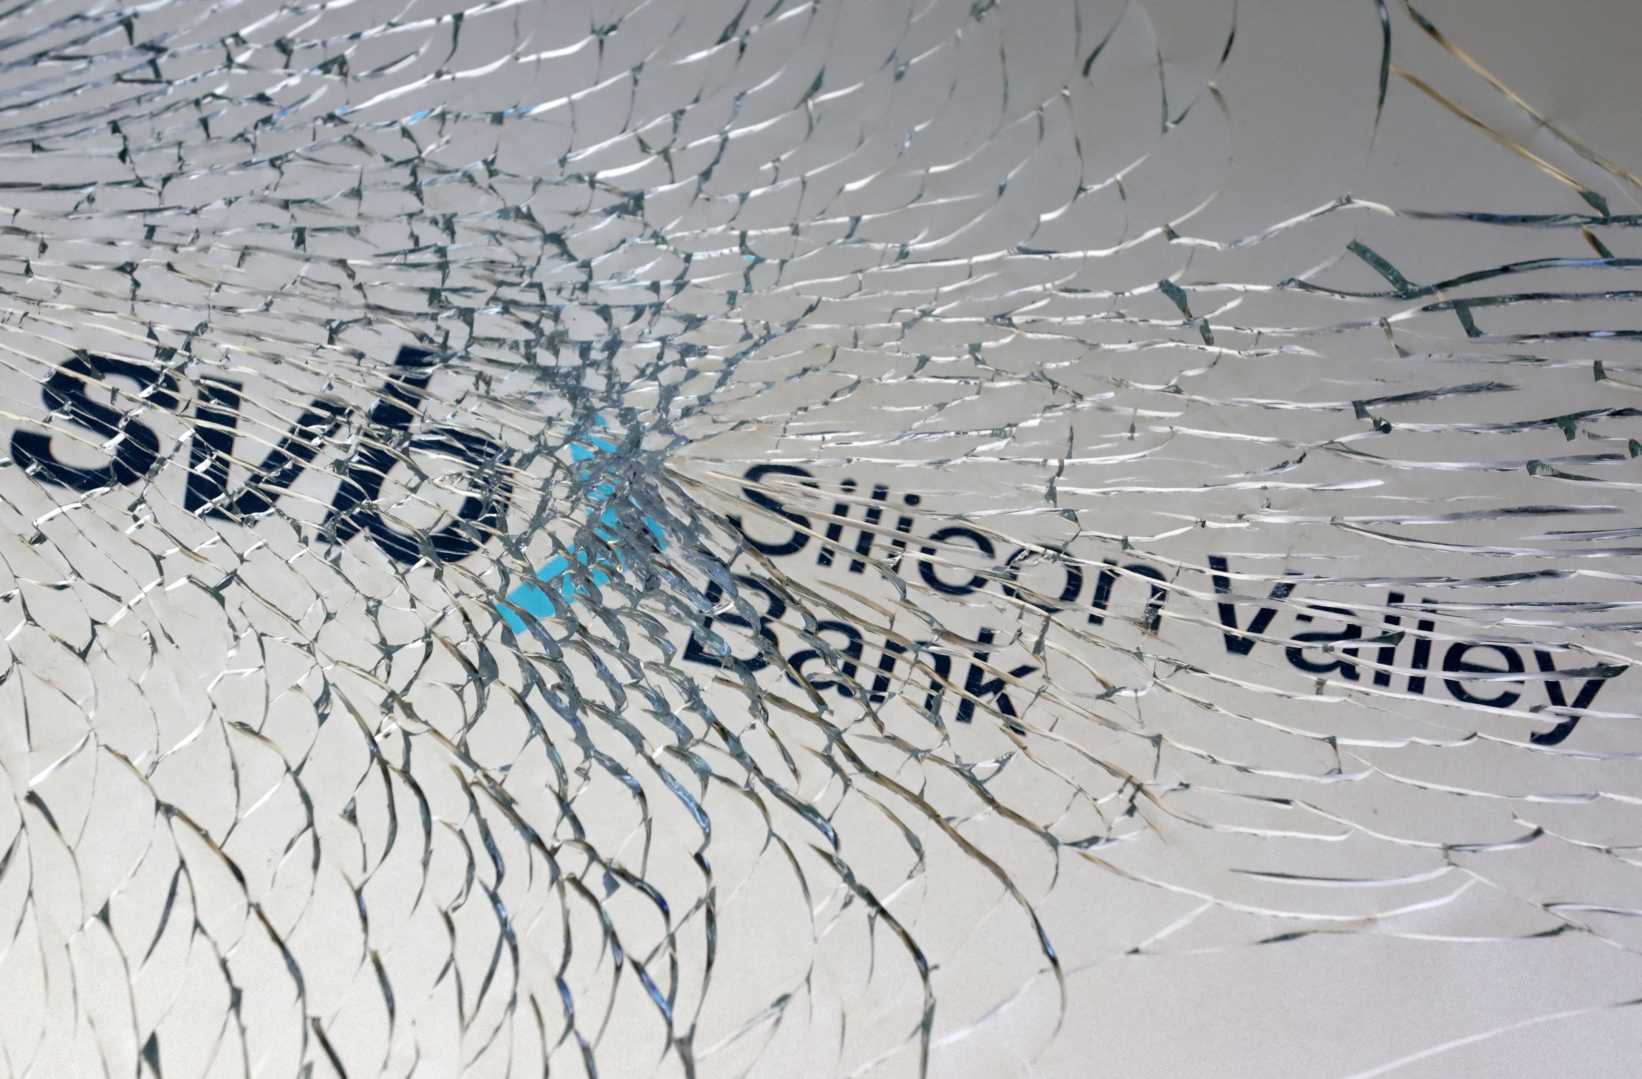 Silicon Valley Bank was mismanaged but federal regulators missed signs that the bank was in trouble and played a key role in the failure.